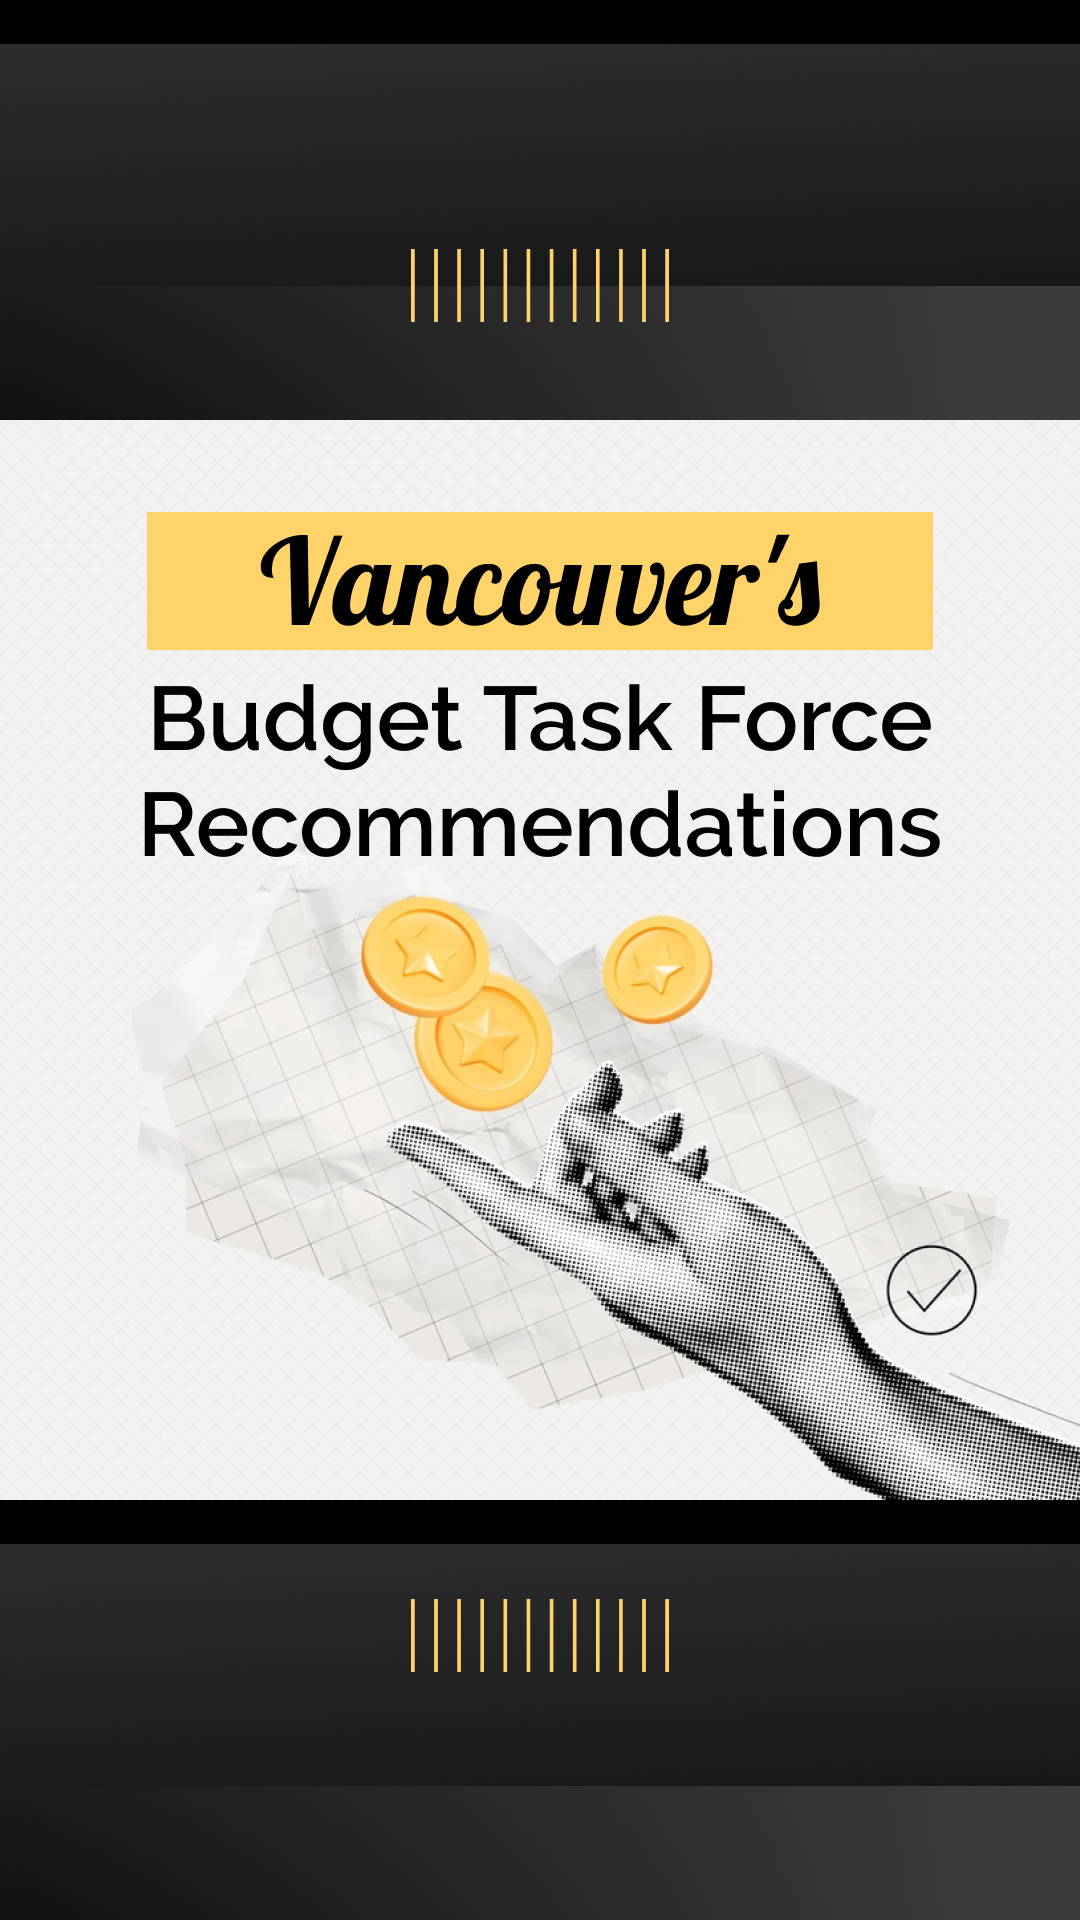 Vancouver’s Budget Task Force Recommendations